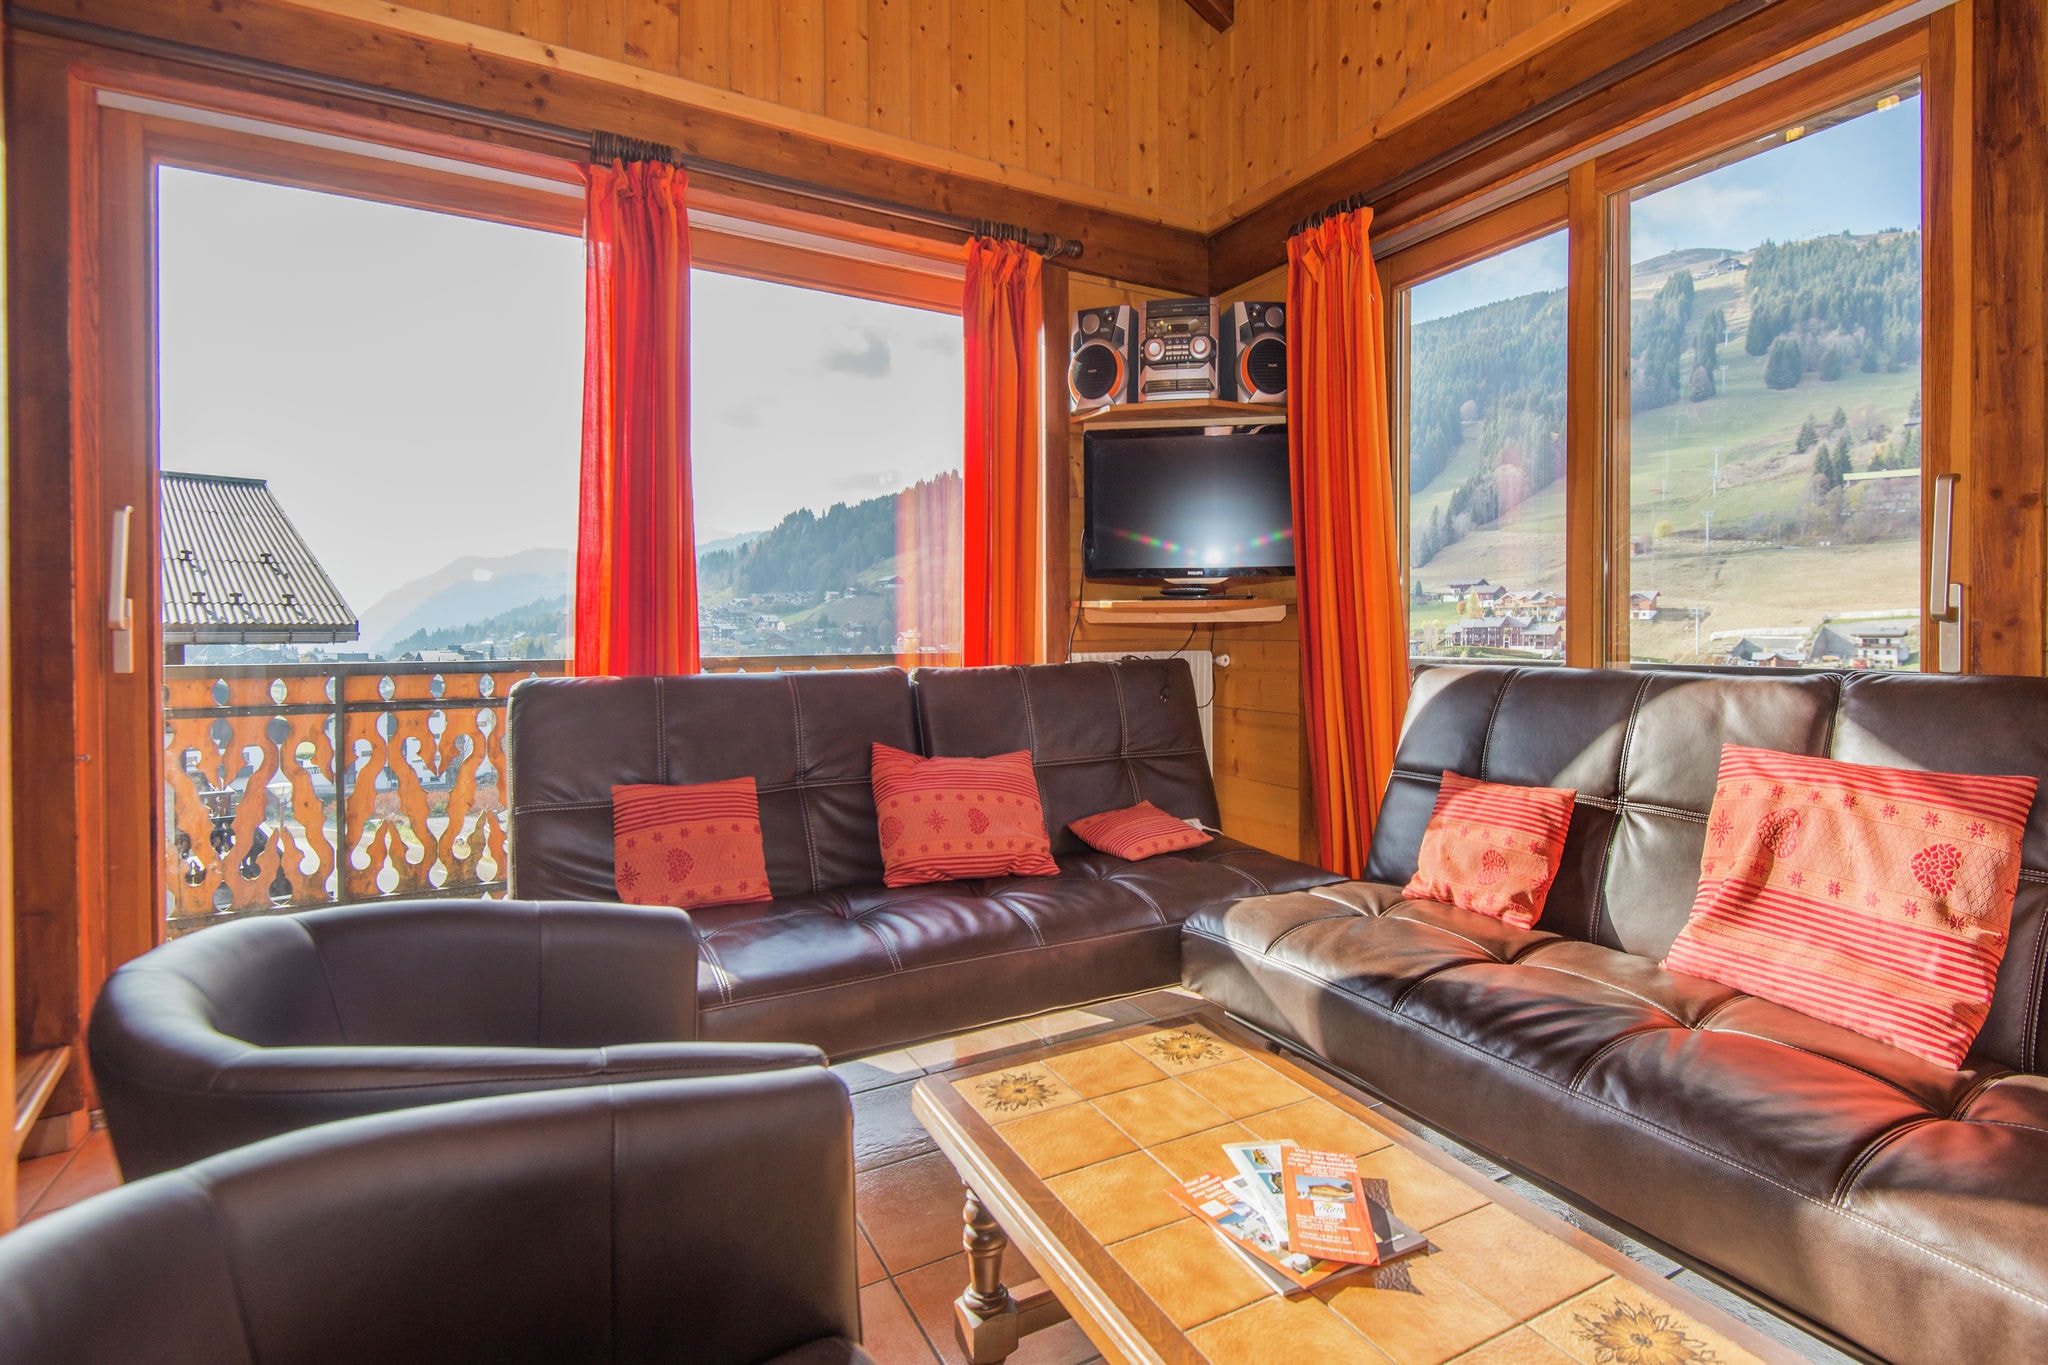 Rental for 14 people in beautiful ski area between mountains and nature